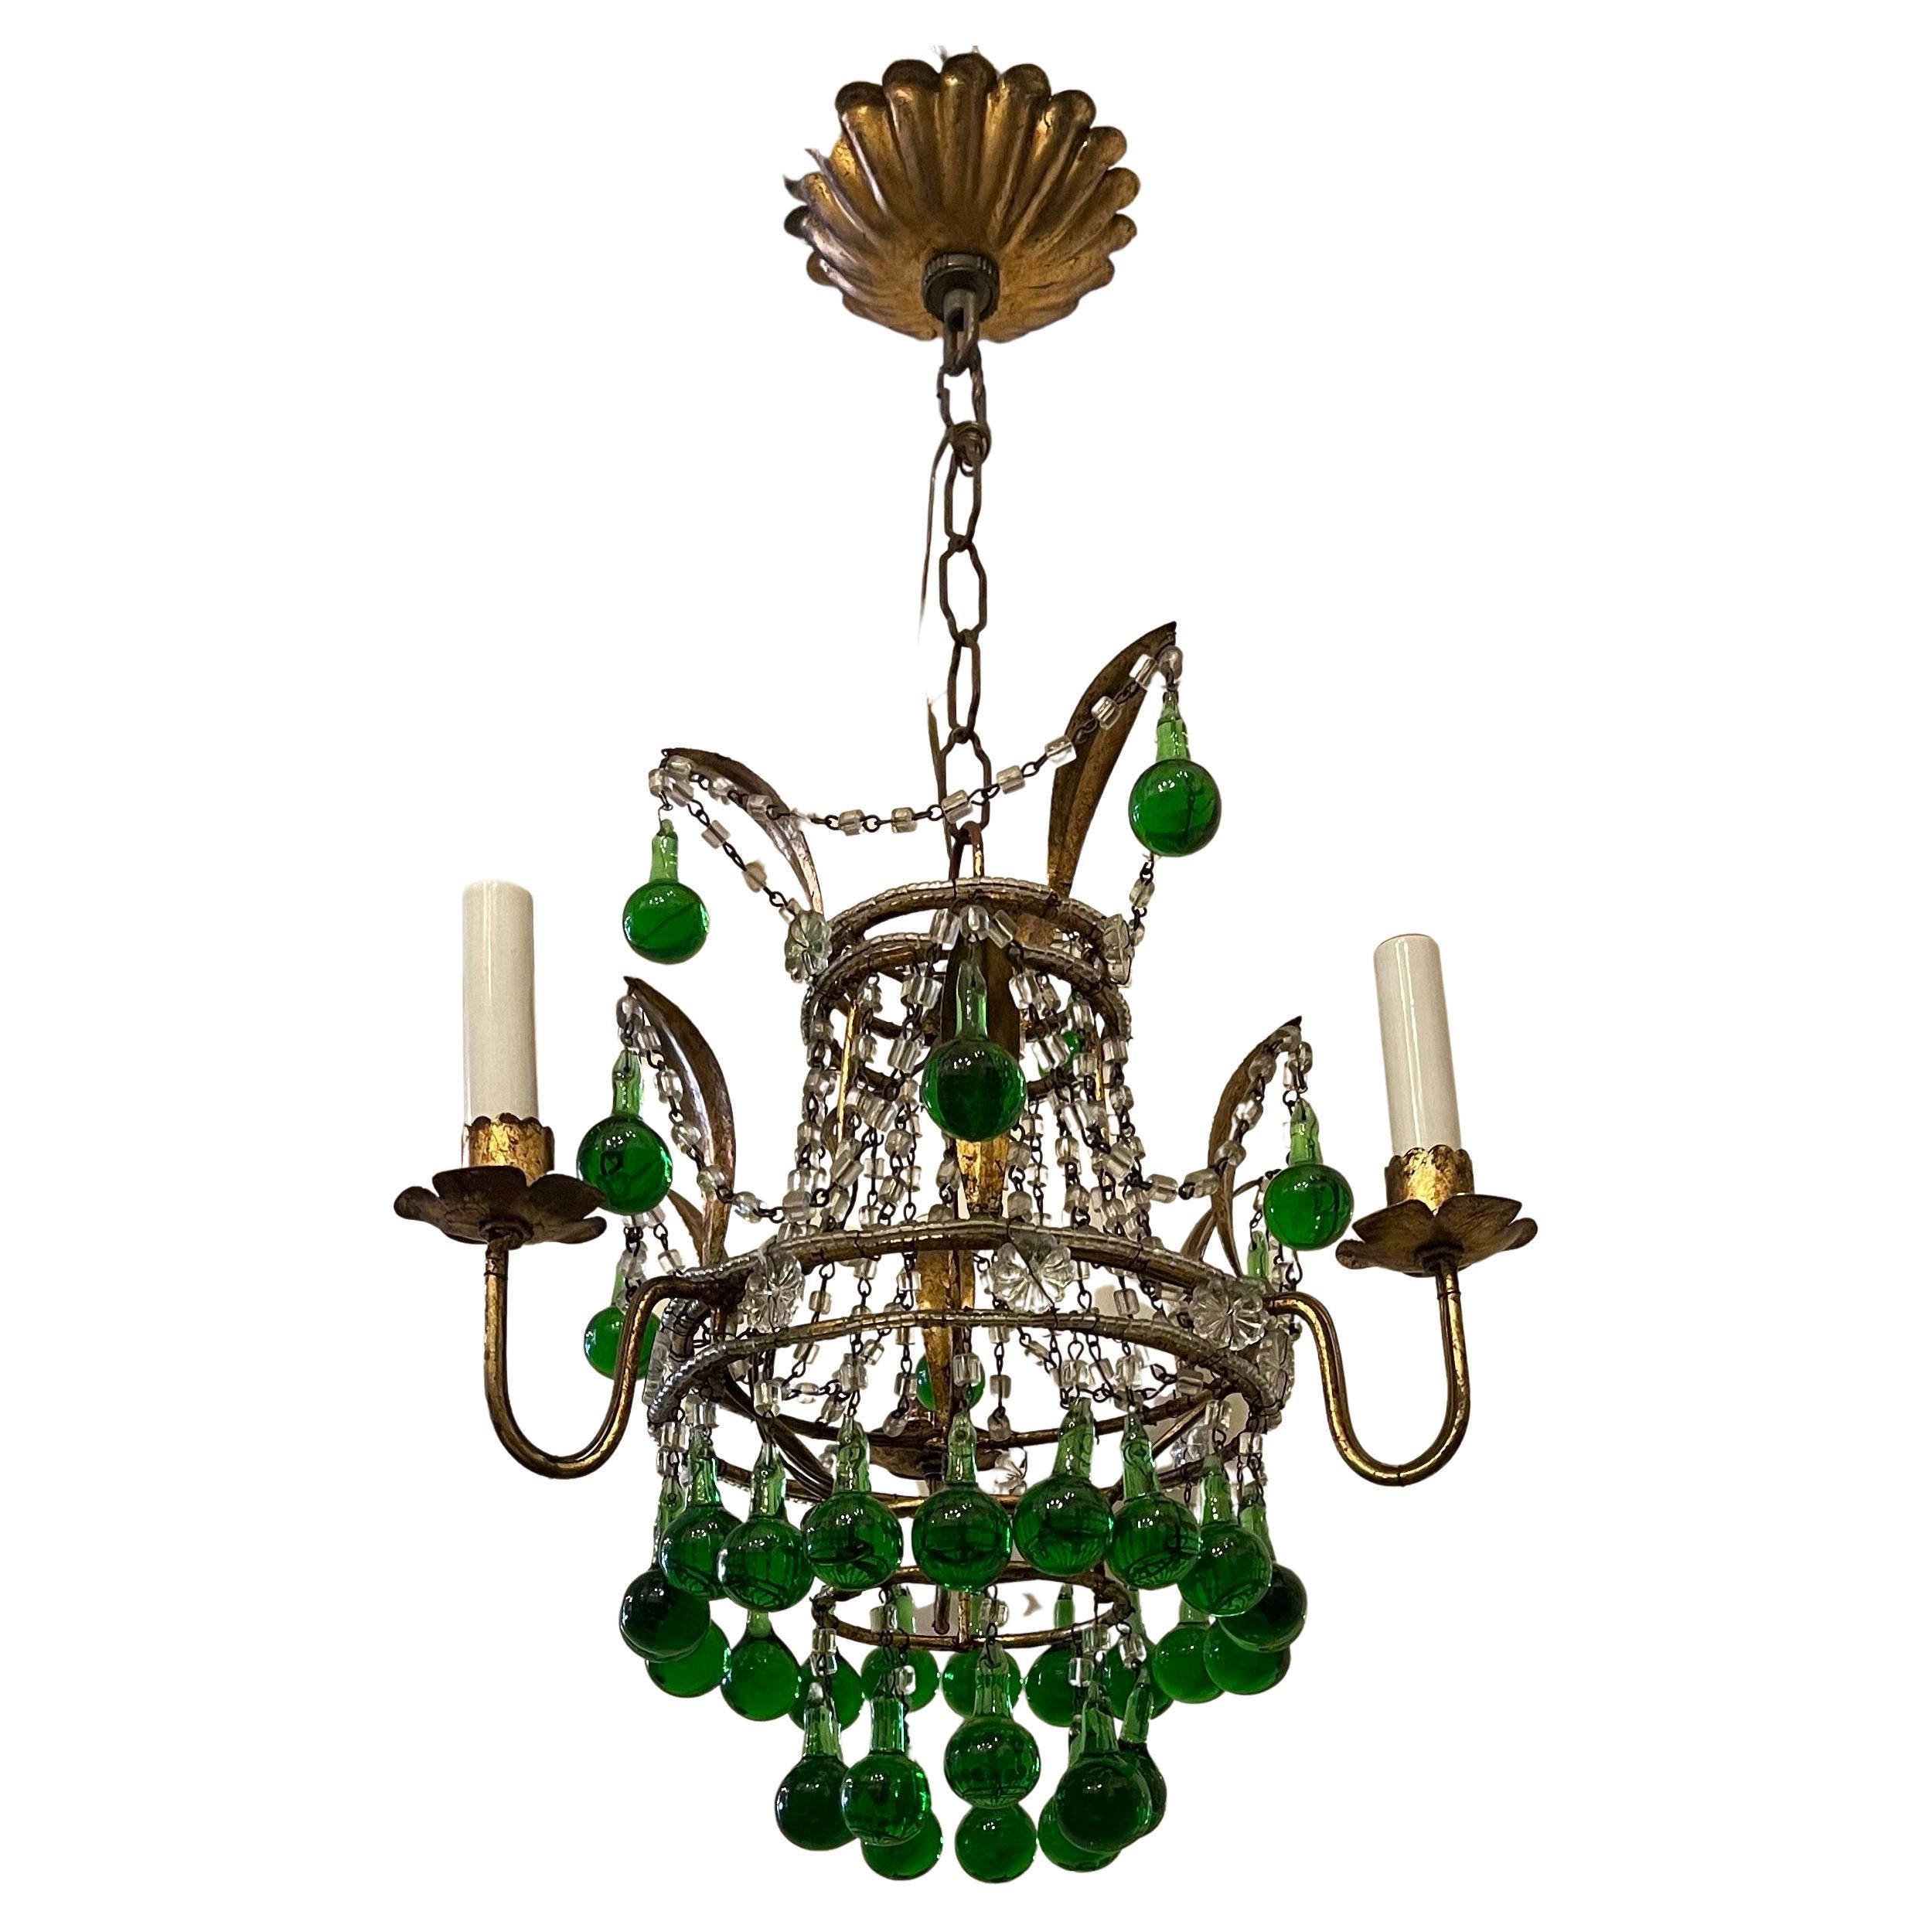 A wonderful crystal beaded gold gilt with emerald green tear drops this italian petite chandelier fixture has 3 candelabra lights.